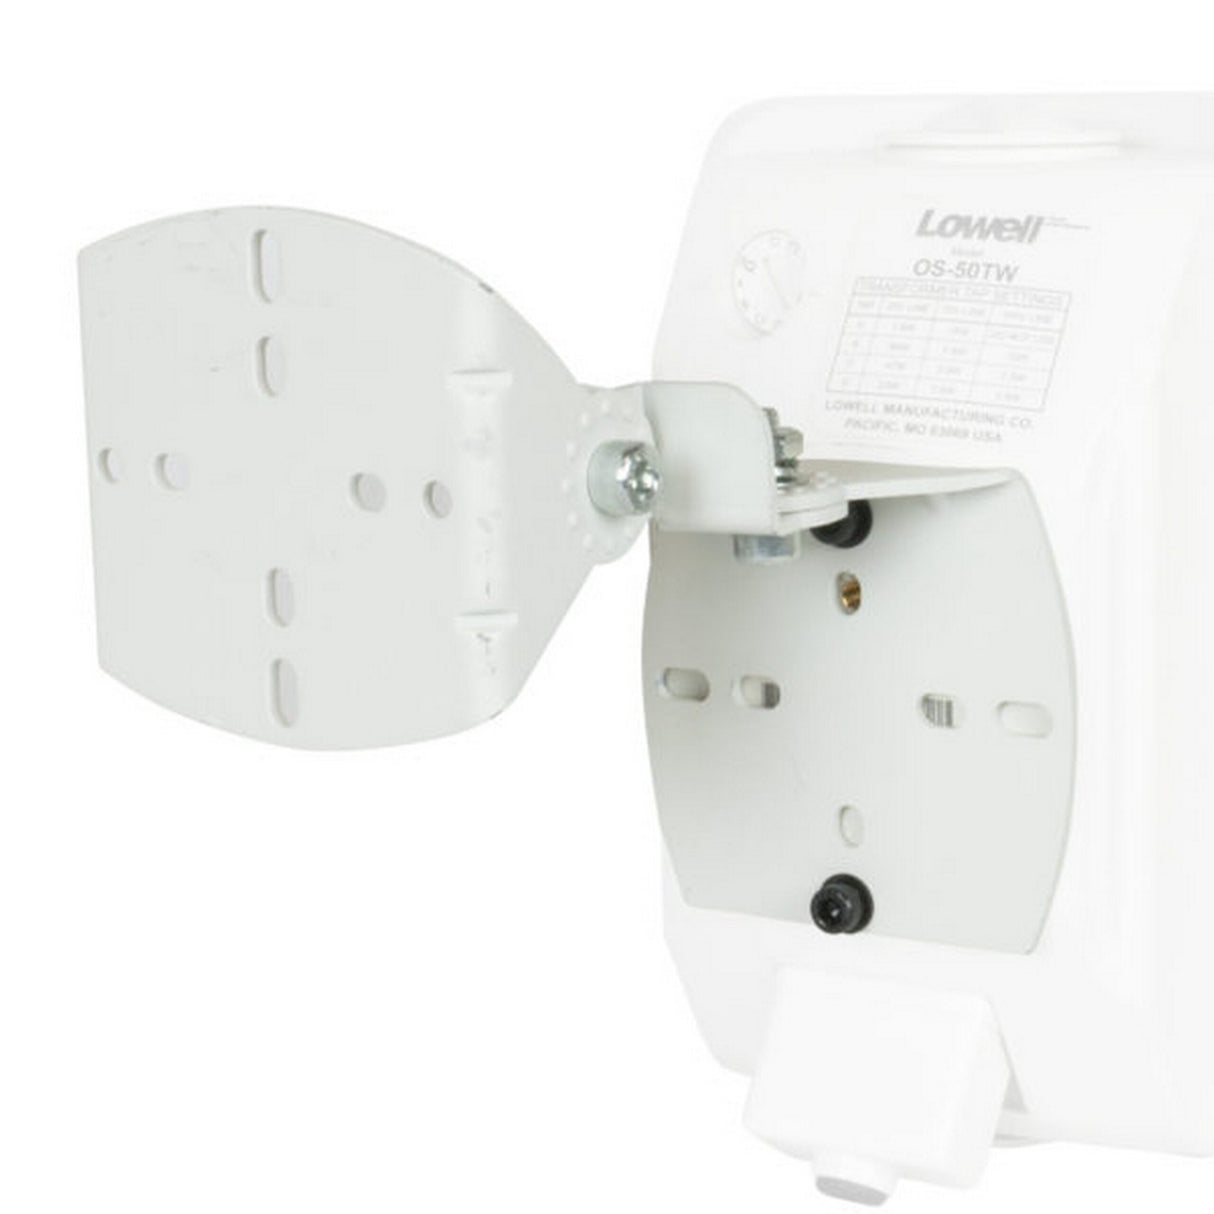 Lowell OS-BRKT-W Omni-Directional Bracket for OS-100/OS-50 Series, White